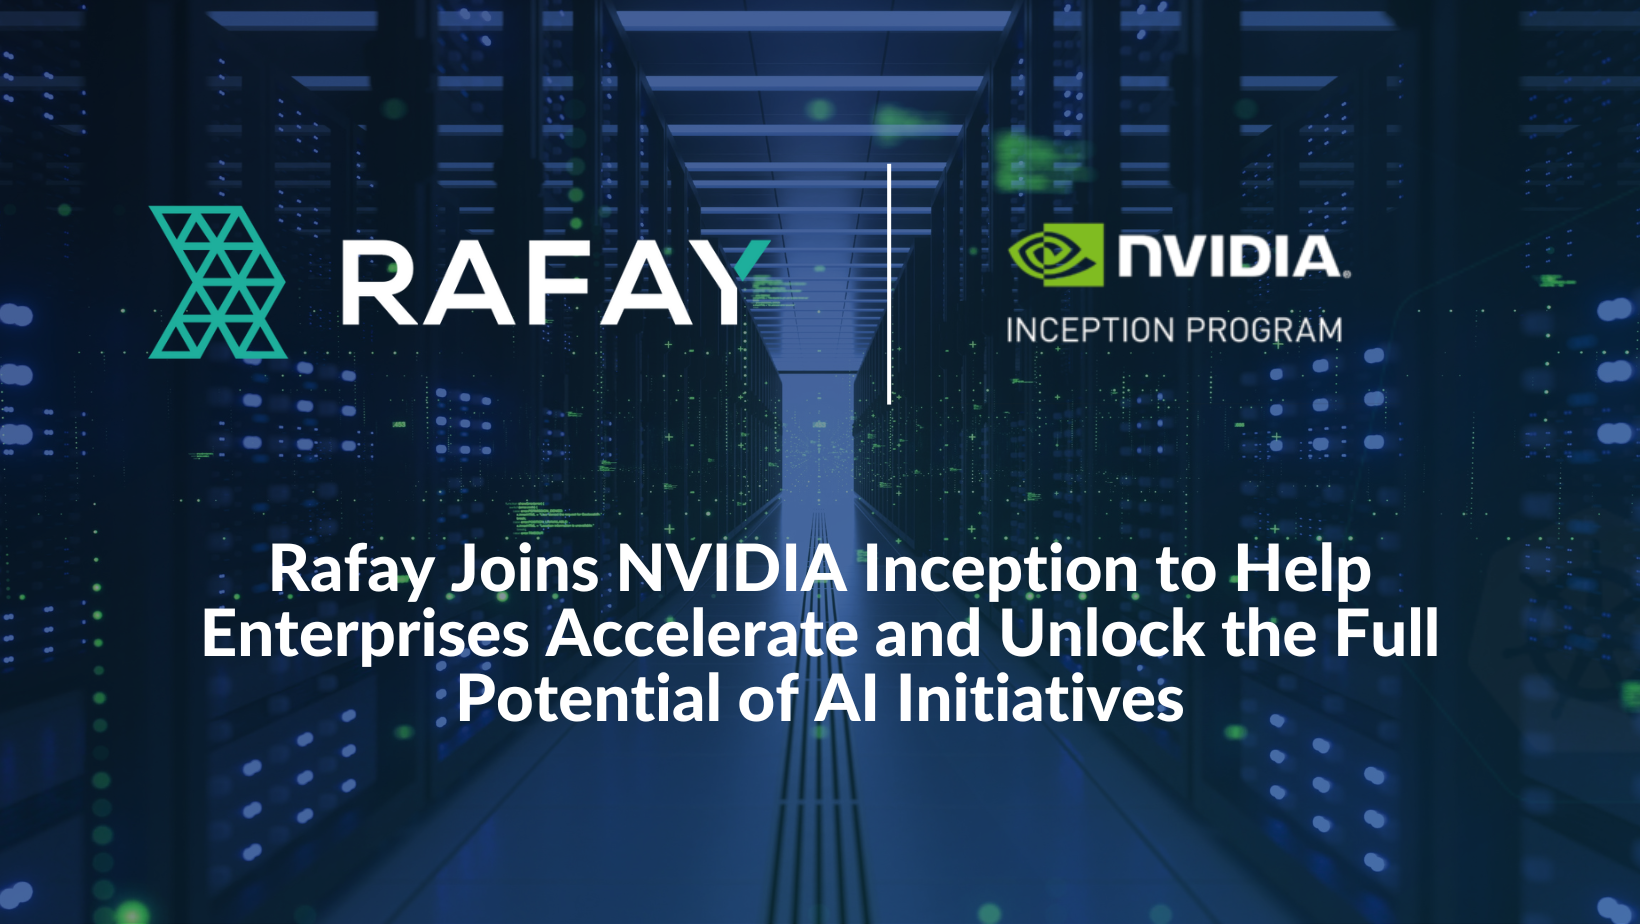 Image for Rafay Systems Partners with NVIDIA to Supercharge Enterprise AI Initiatives